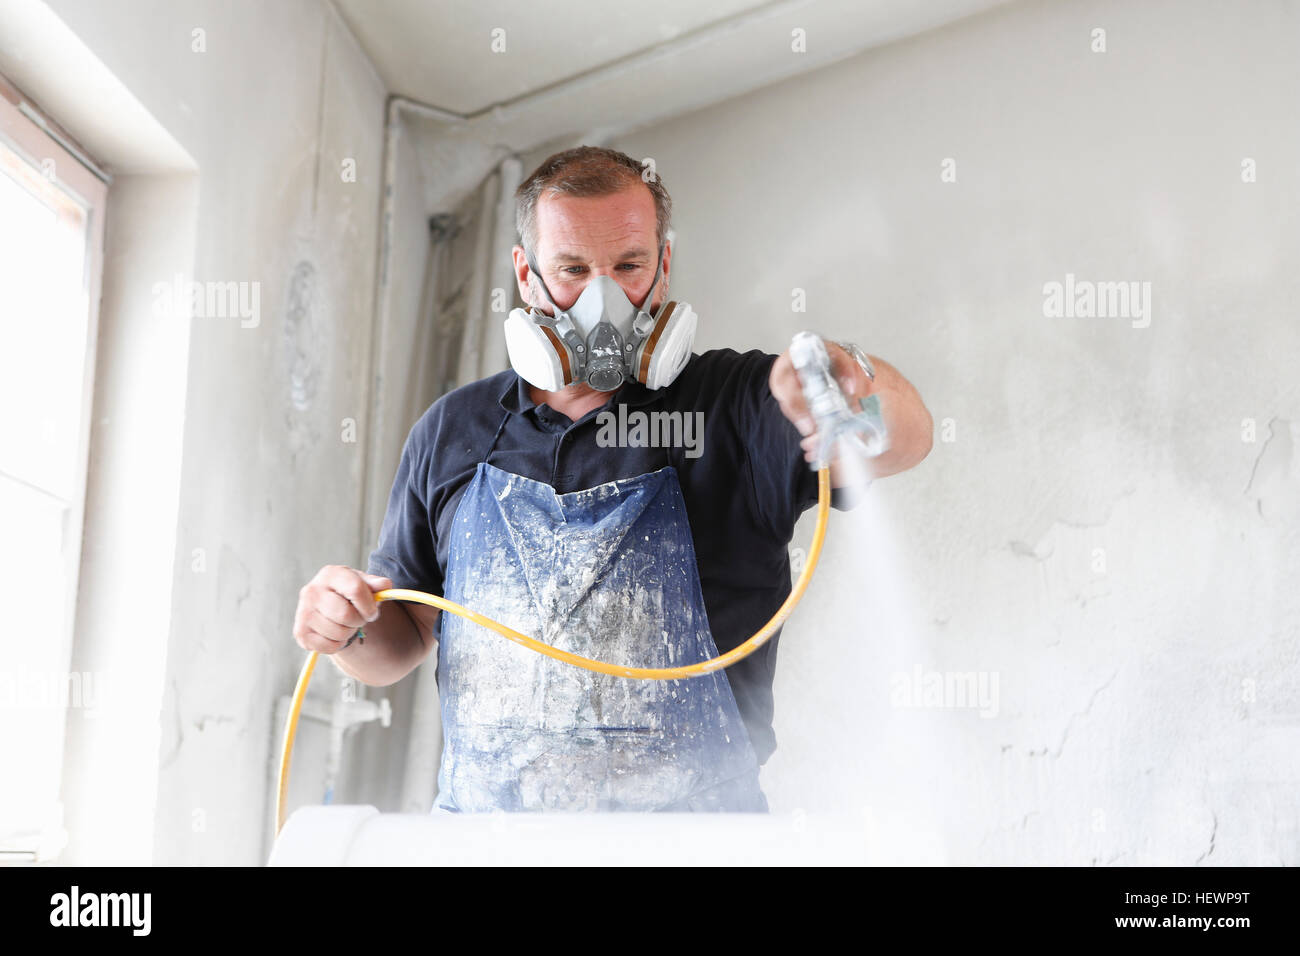 Man wearing protective mask spray painting timber Stock Photo